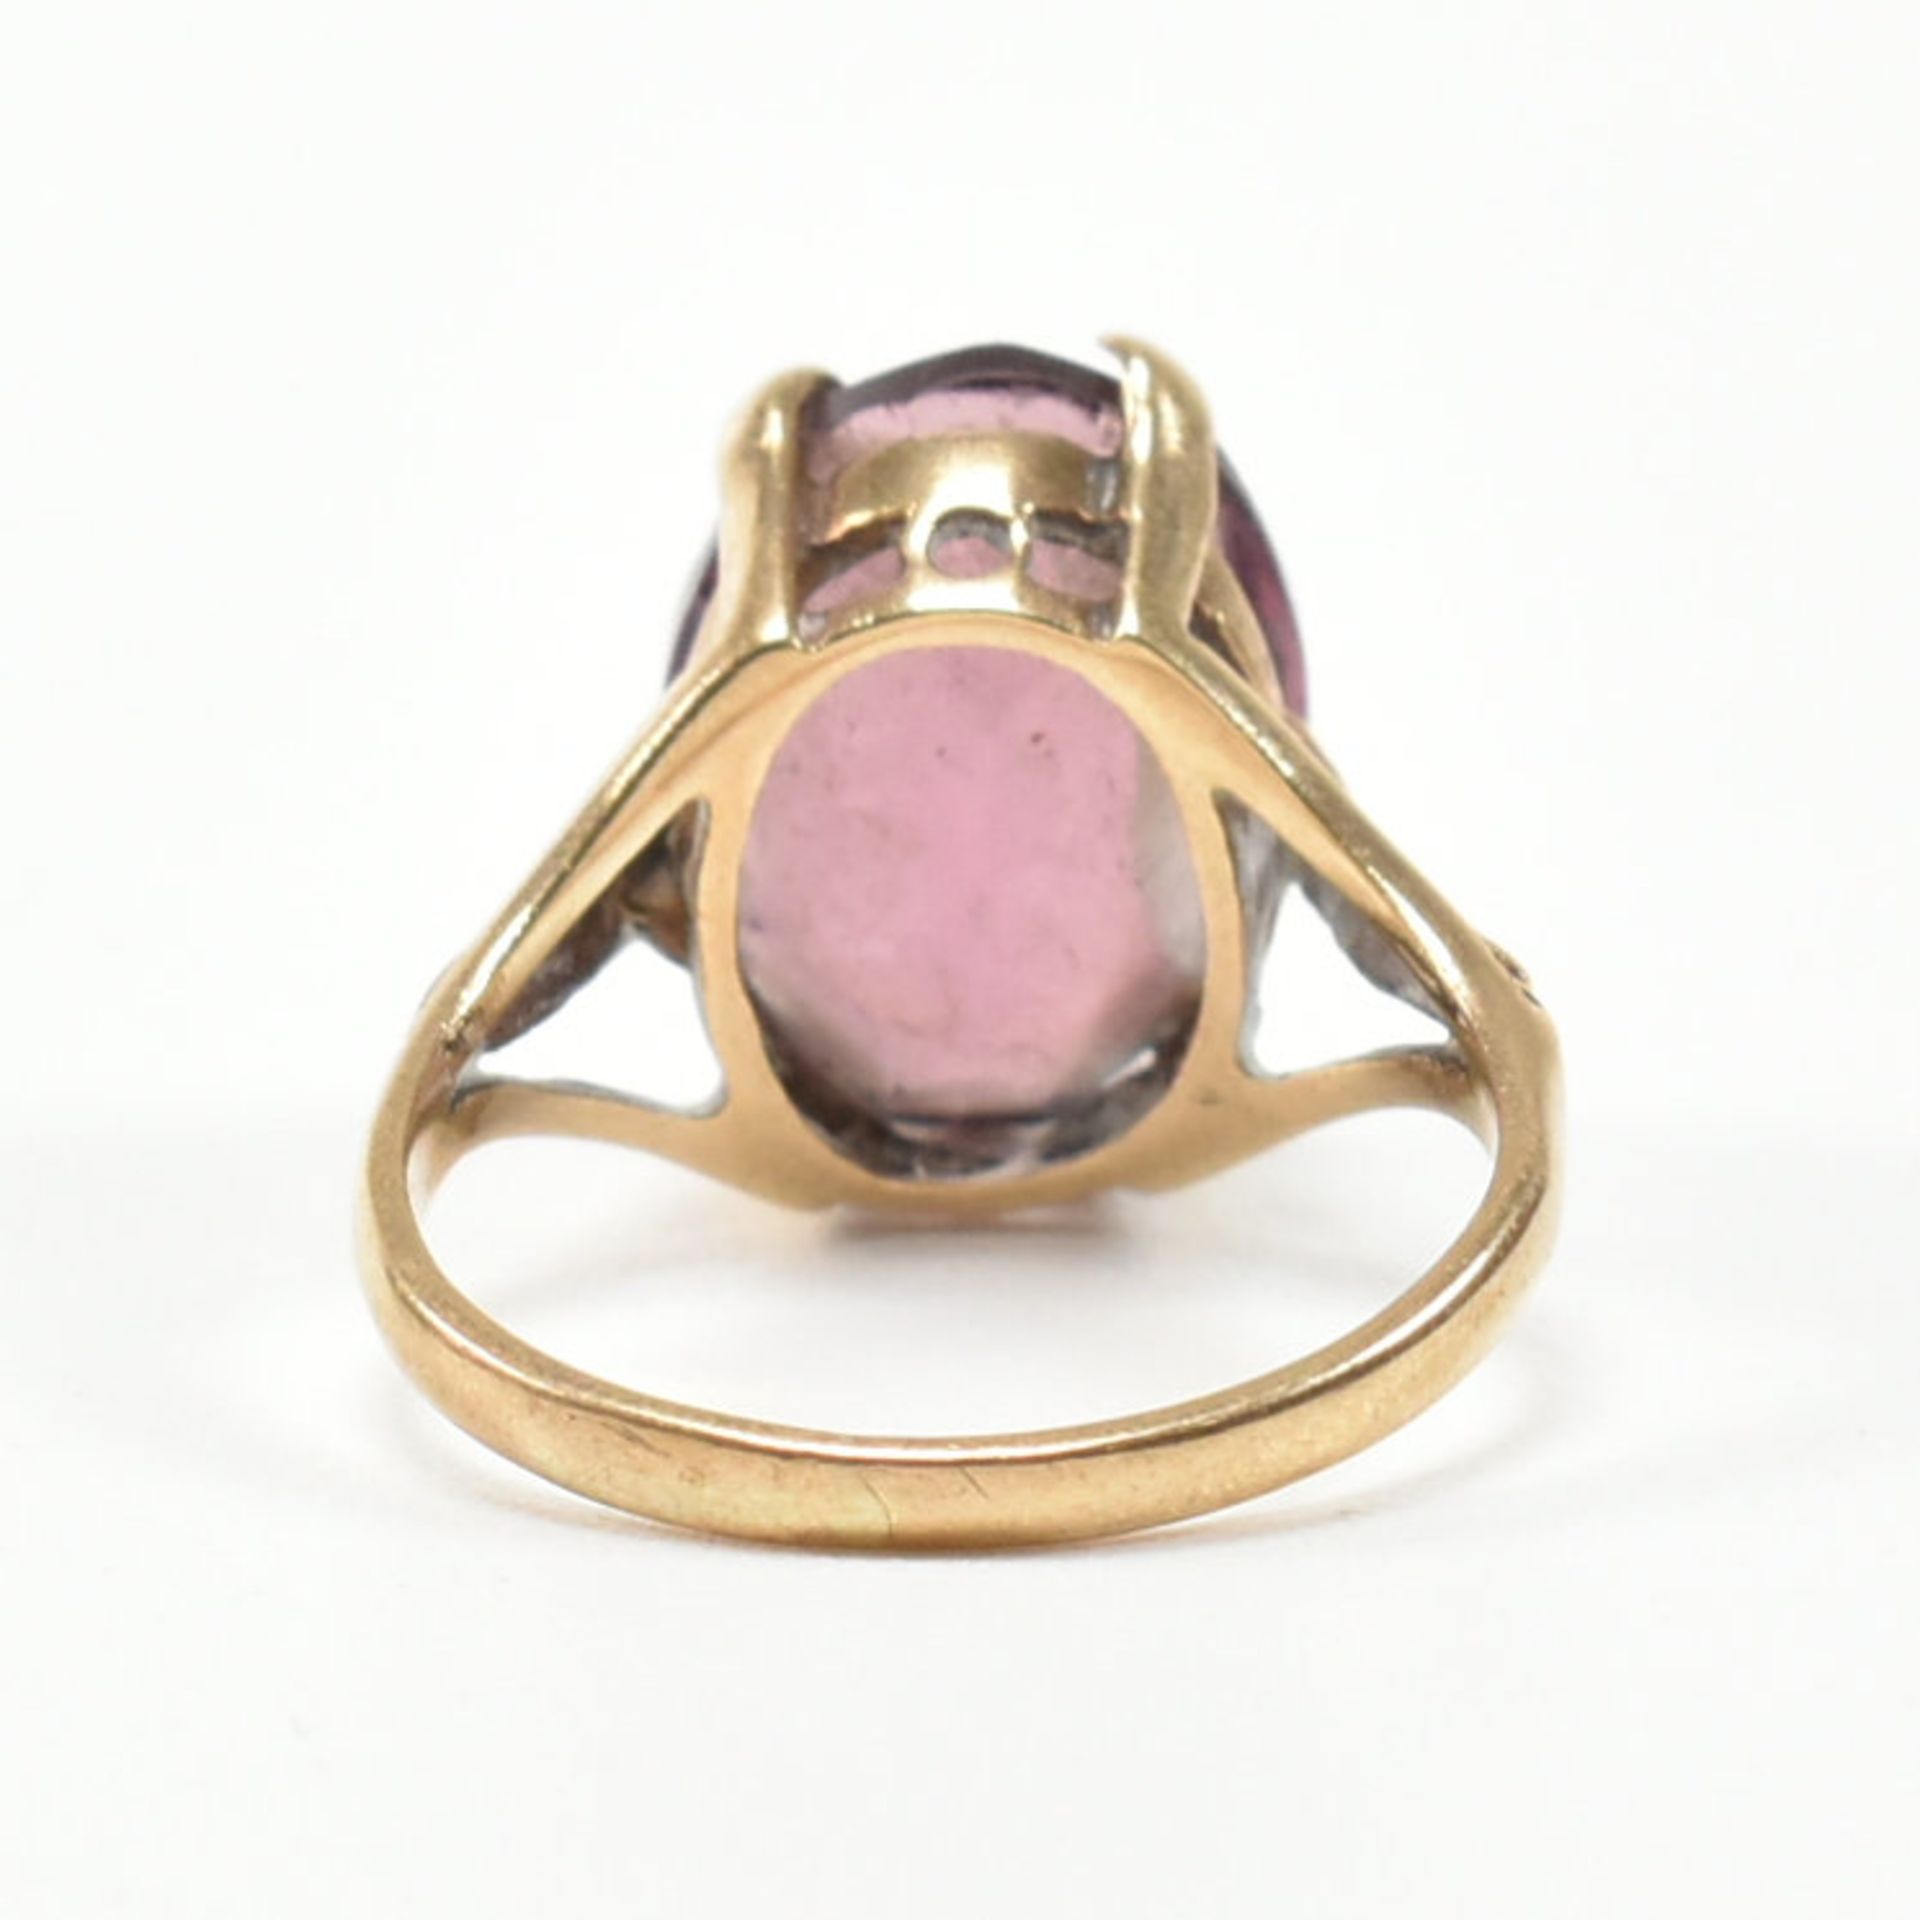 VINTAGE 9CT GOLD & PURPLE STONE RING - Image 6 of 9